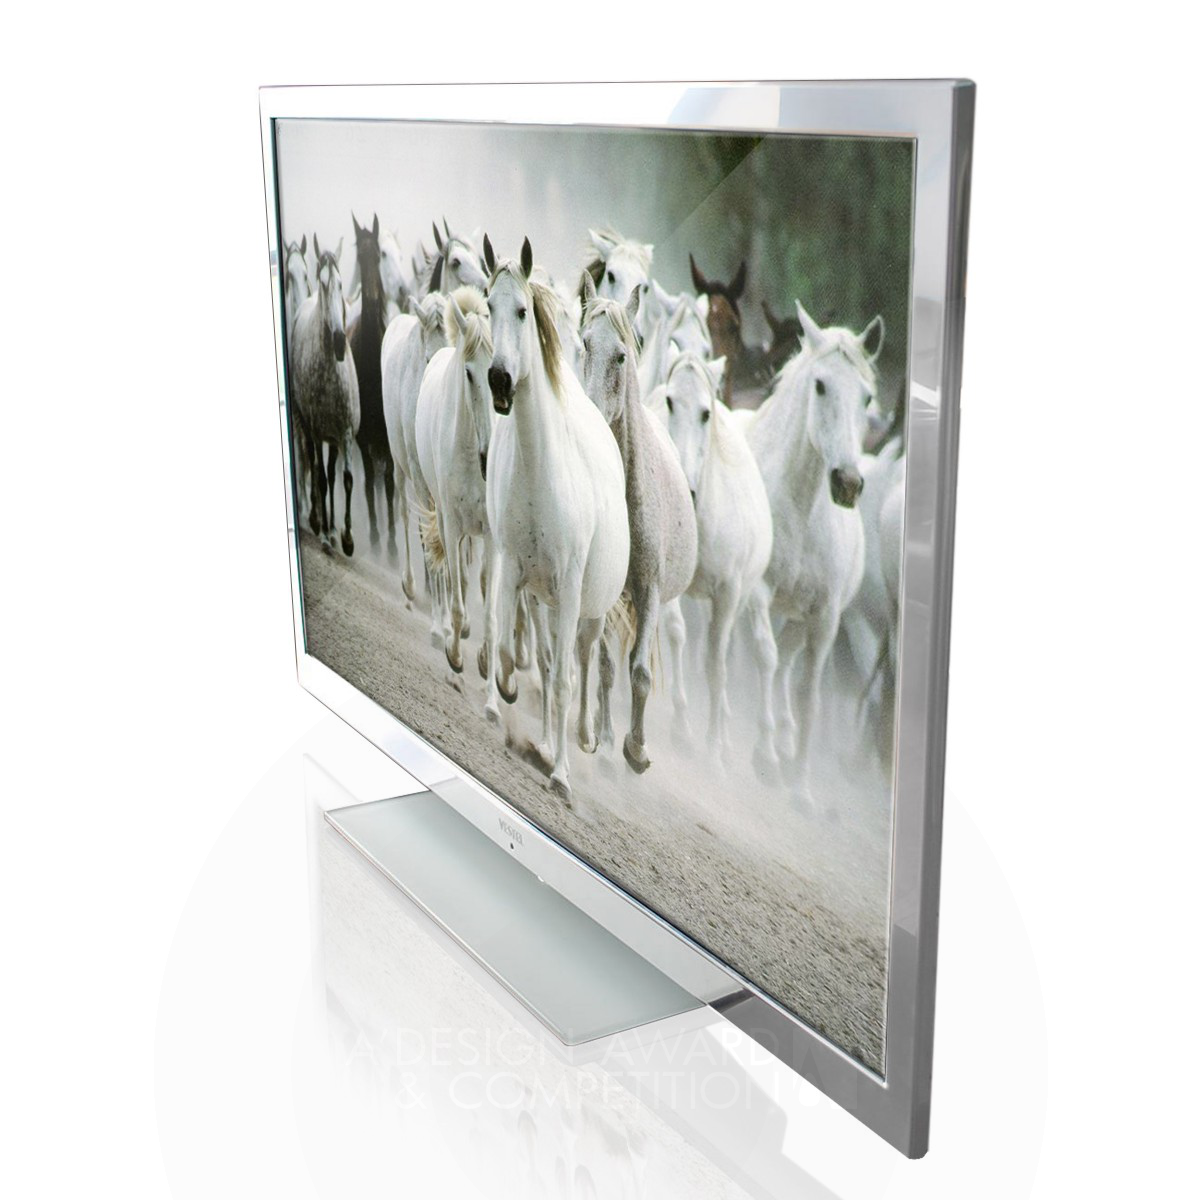 V TV - 46120 46" LED TV supporting the HD broadcast. by Vestel ID Team